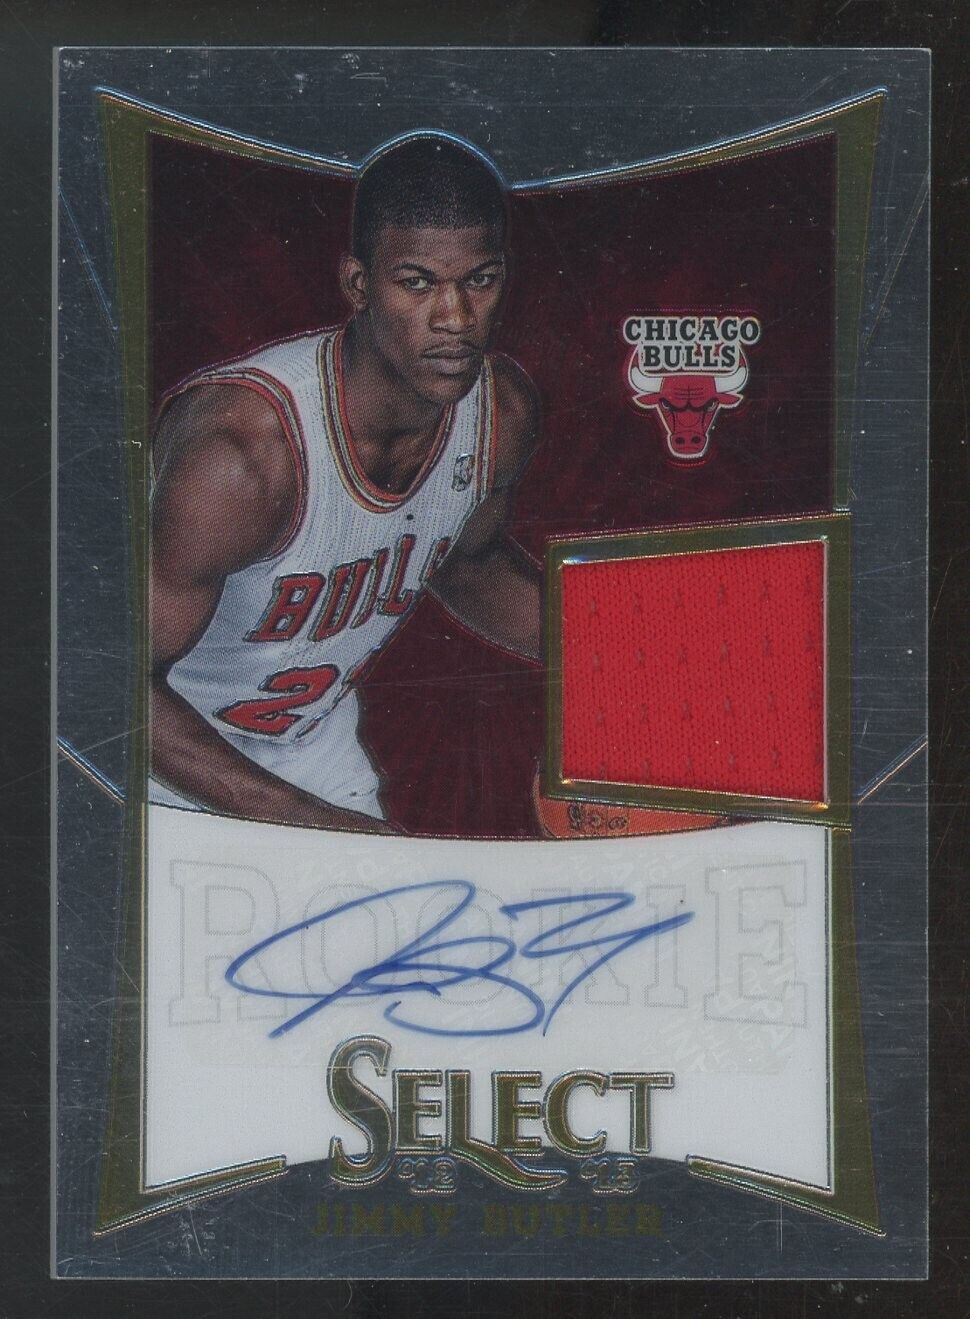 2012-13 Panini Select Jimmy Butler RC Rookie Jersey AUTO 55/399 Chicago Bulls